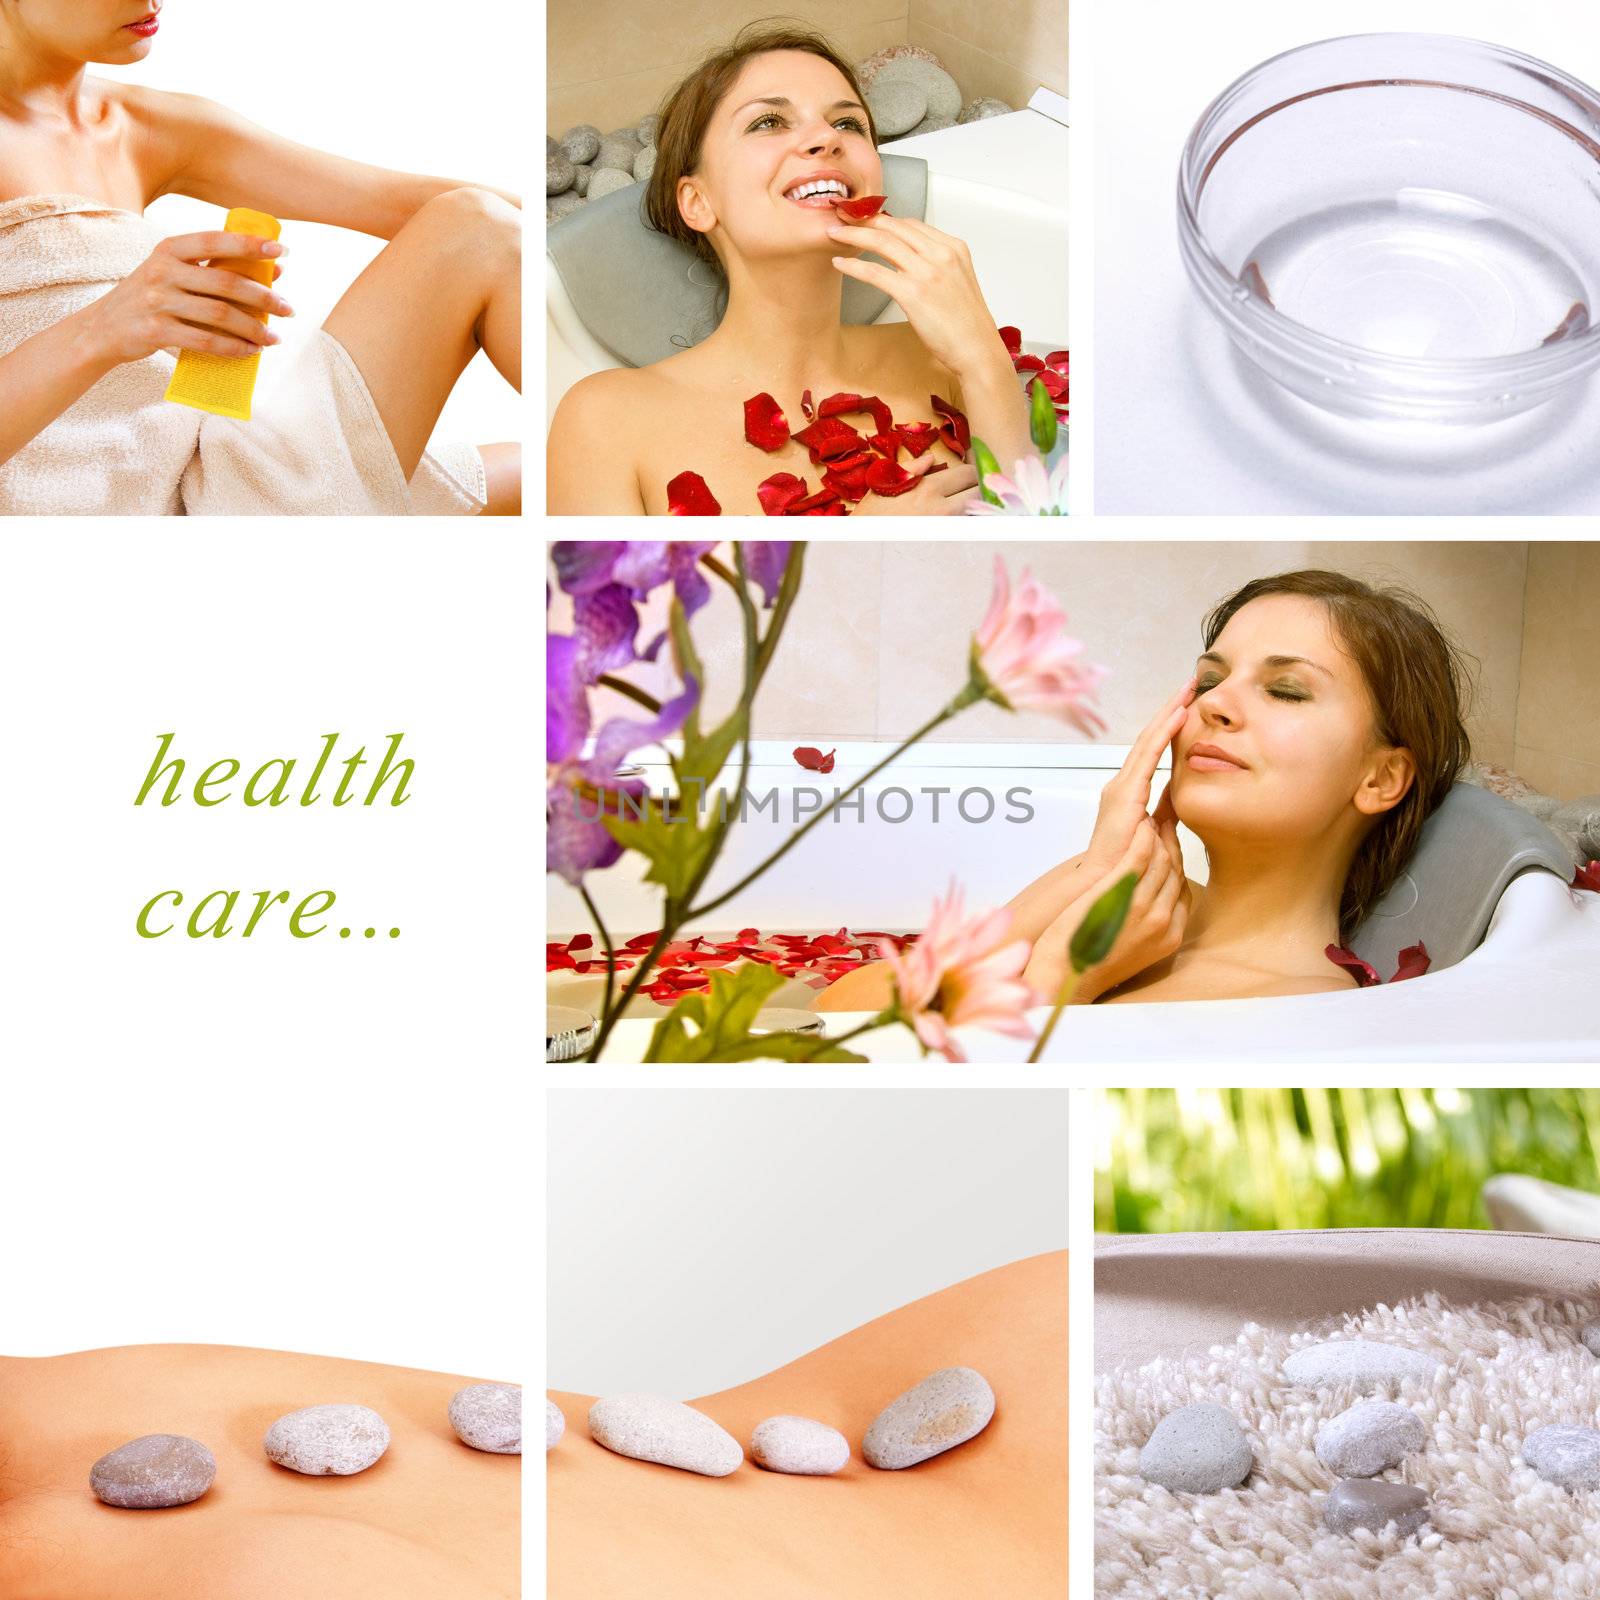 Dayspa concept by ssuaphoto